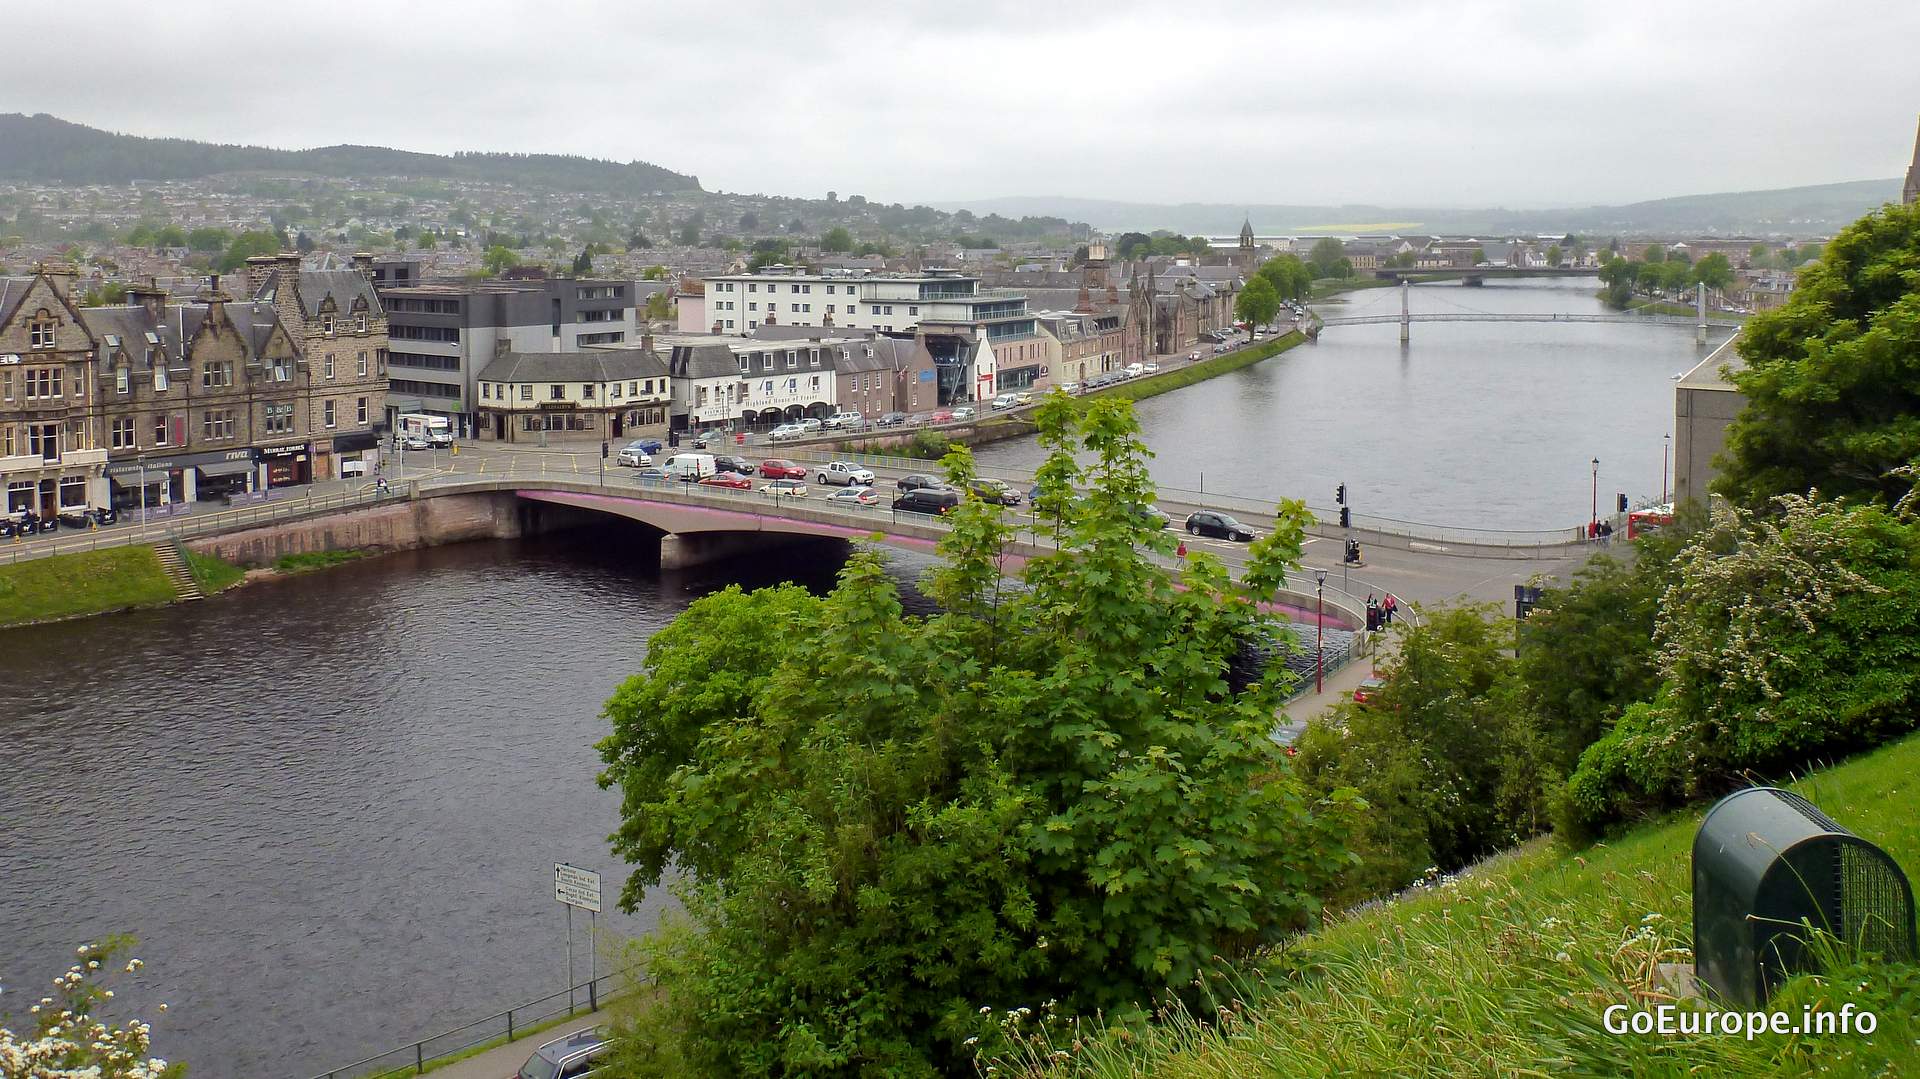 View over Inverness during a walk along the river.